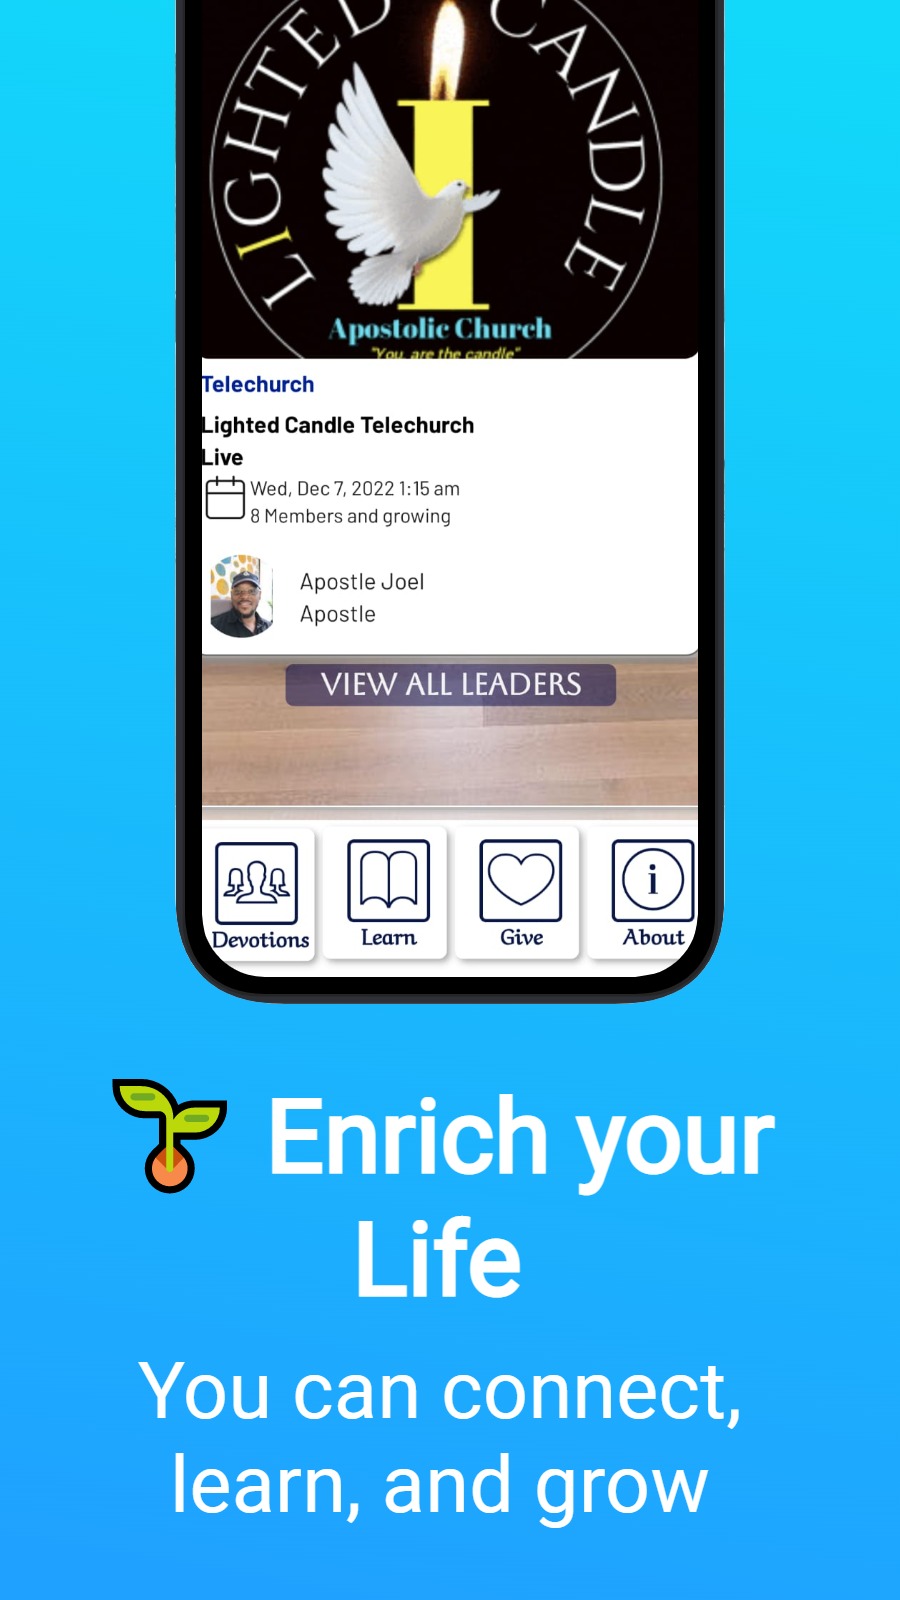 🌱 Enrich your Life - You can connect, learn, and grow